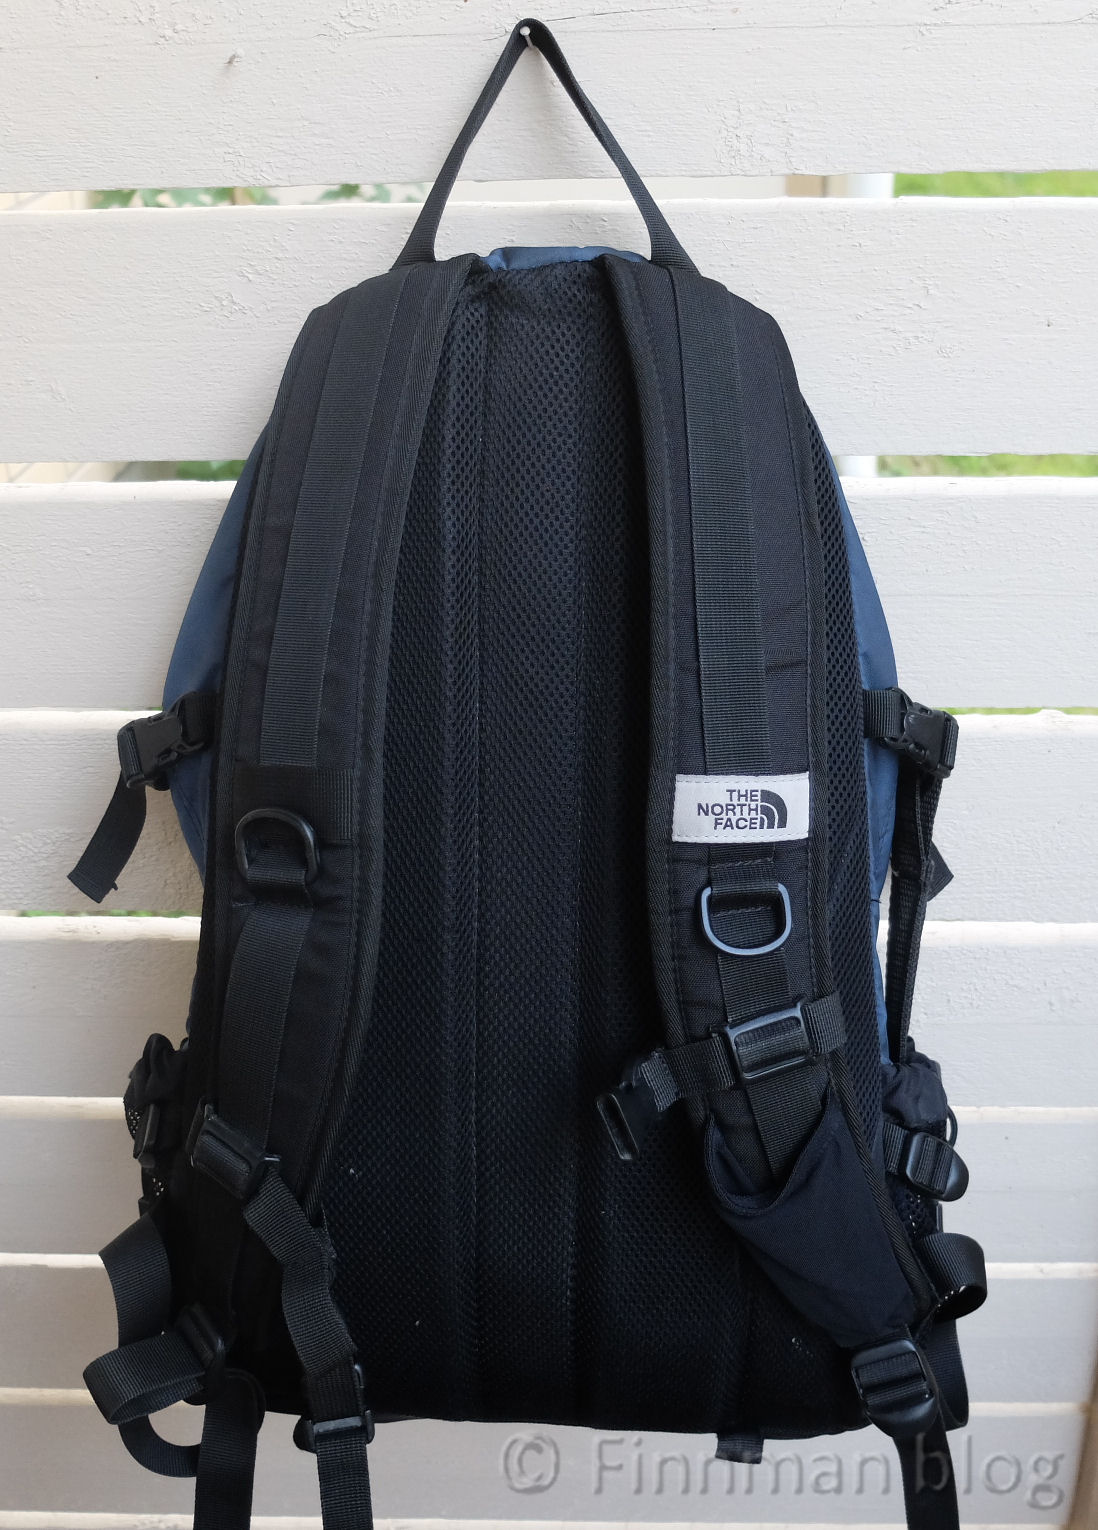 dicks north face backpack